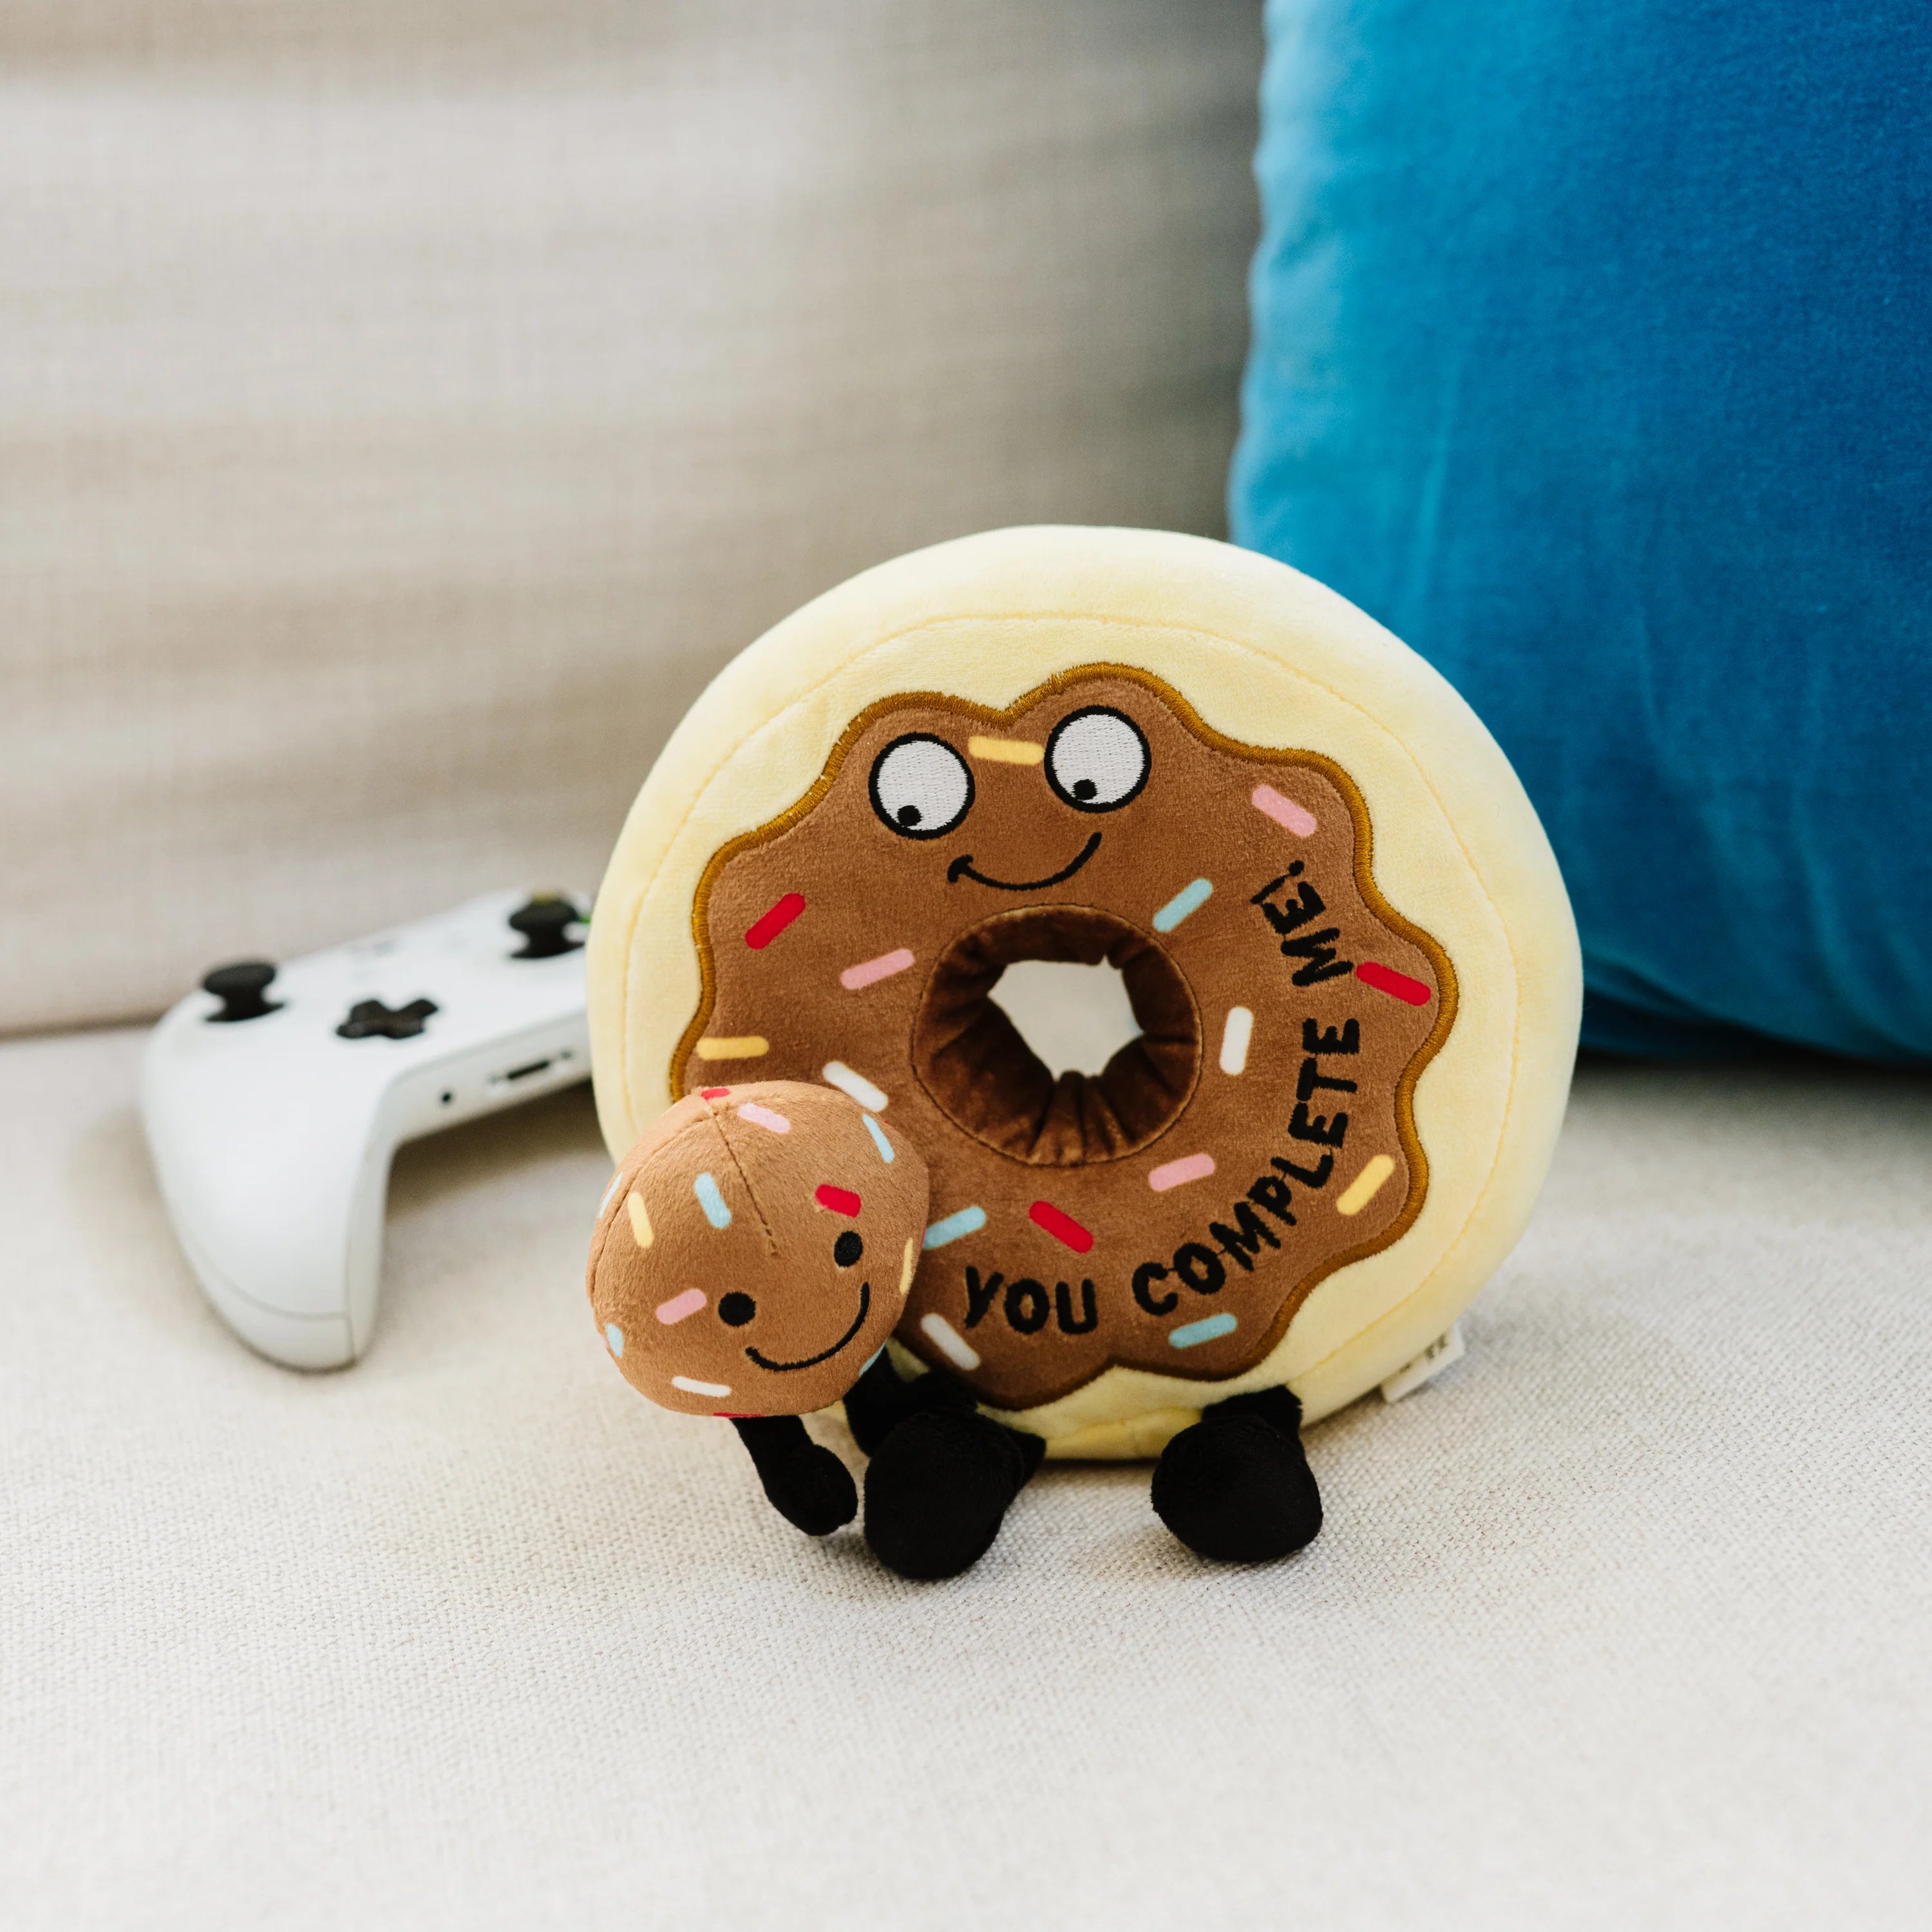 You Complete Me Plush Donut